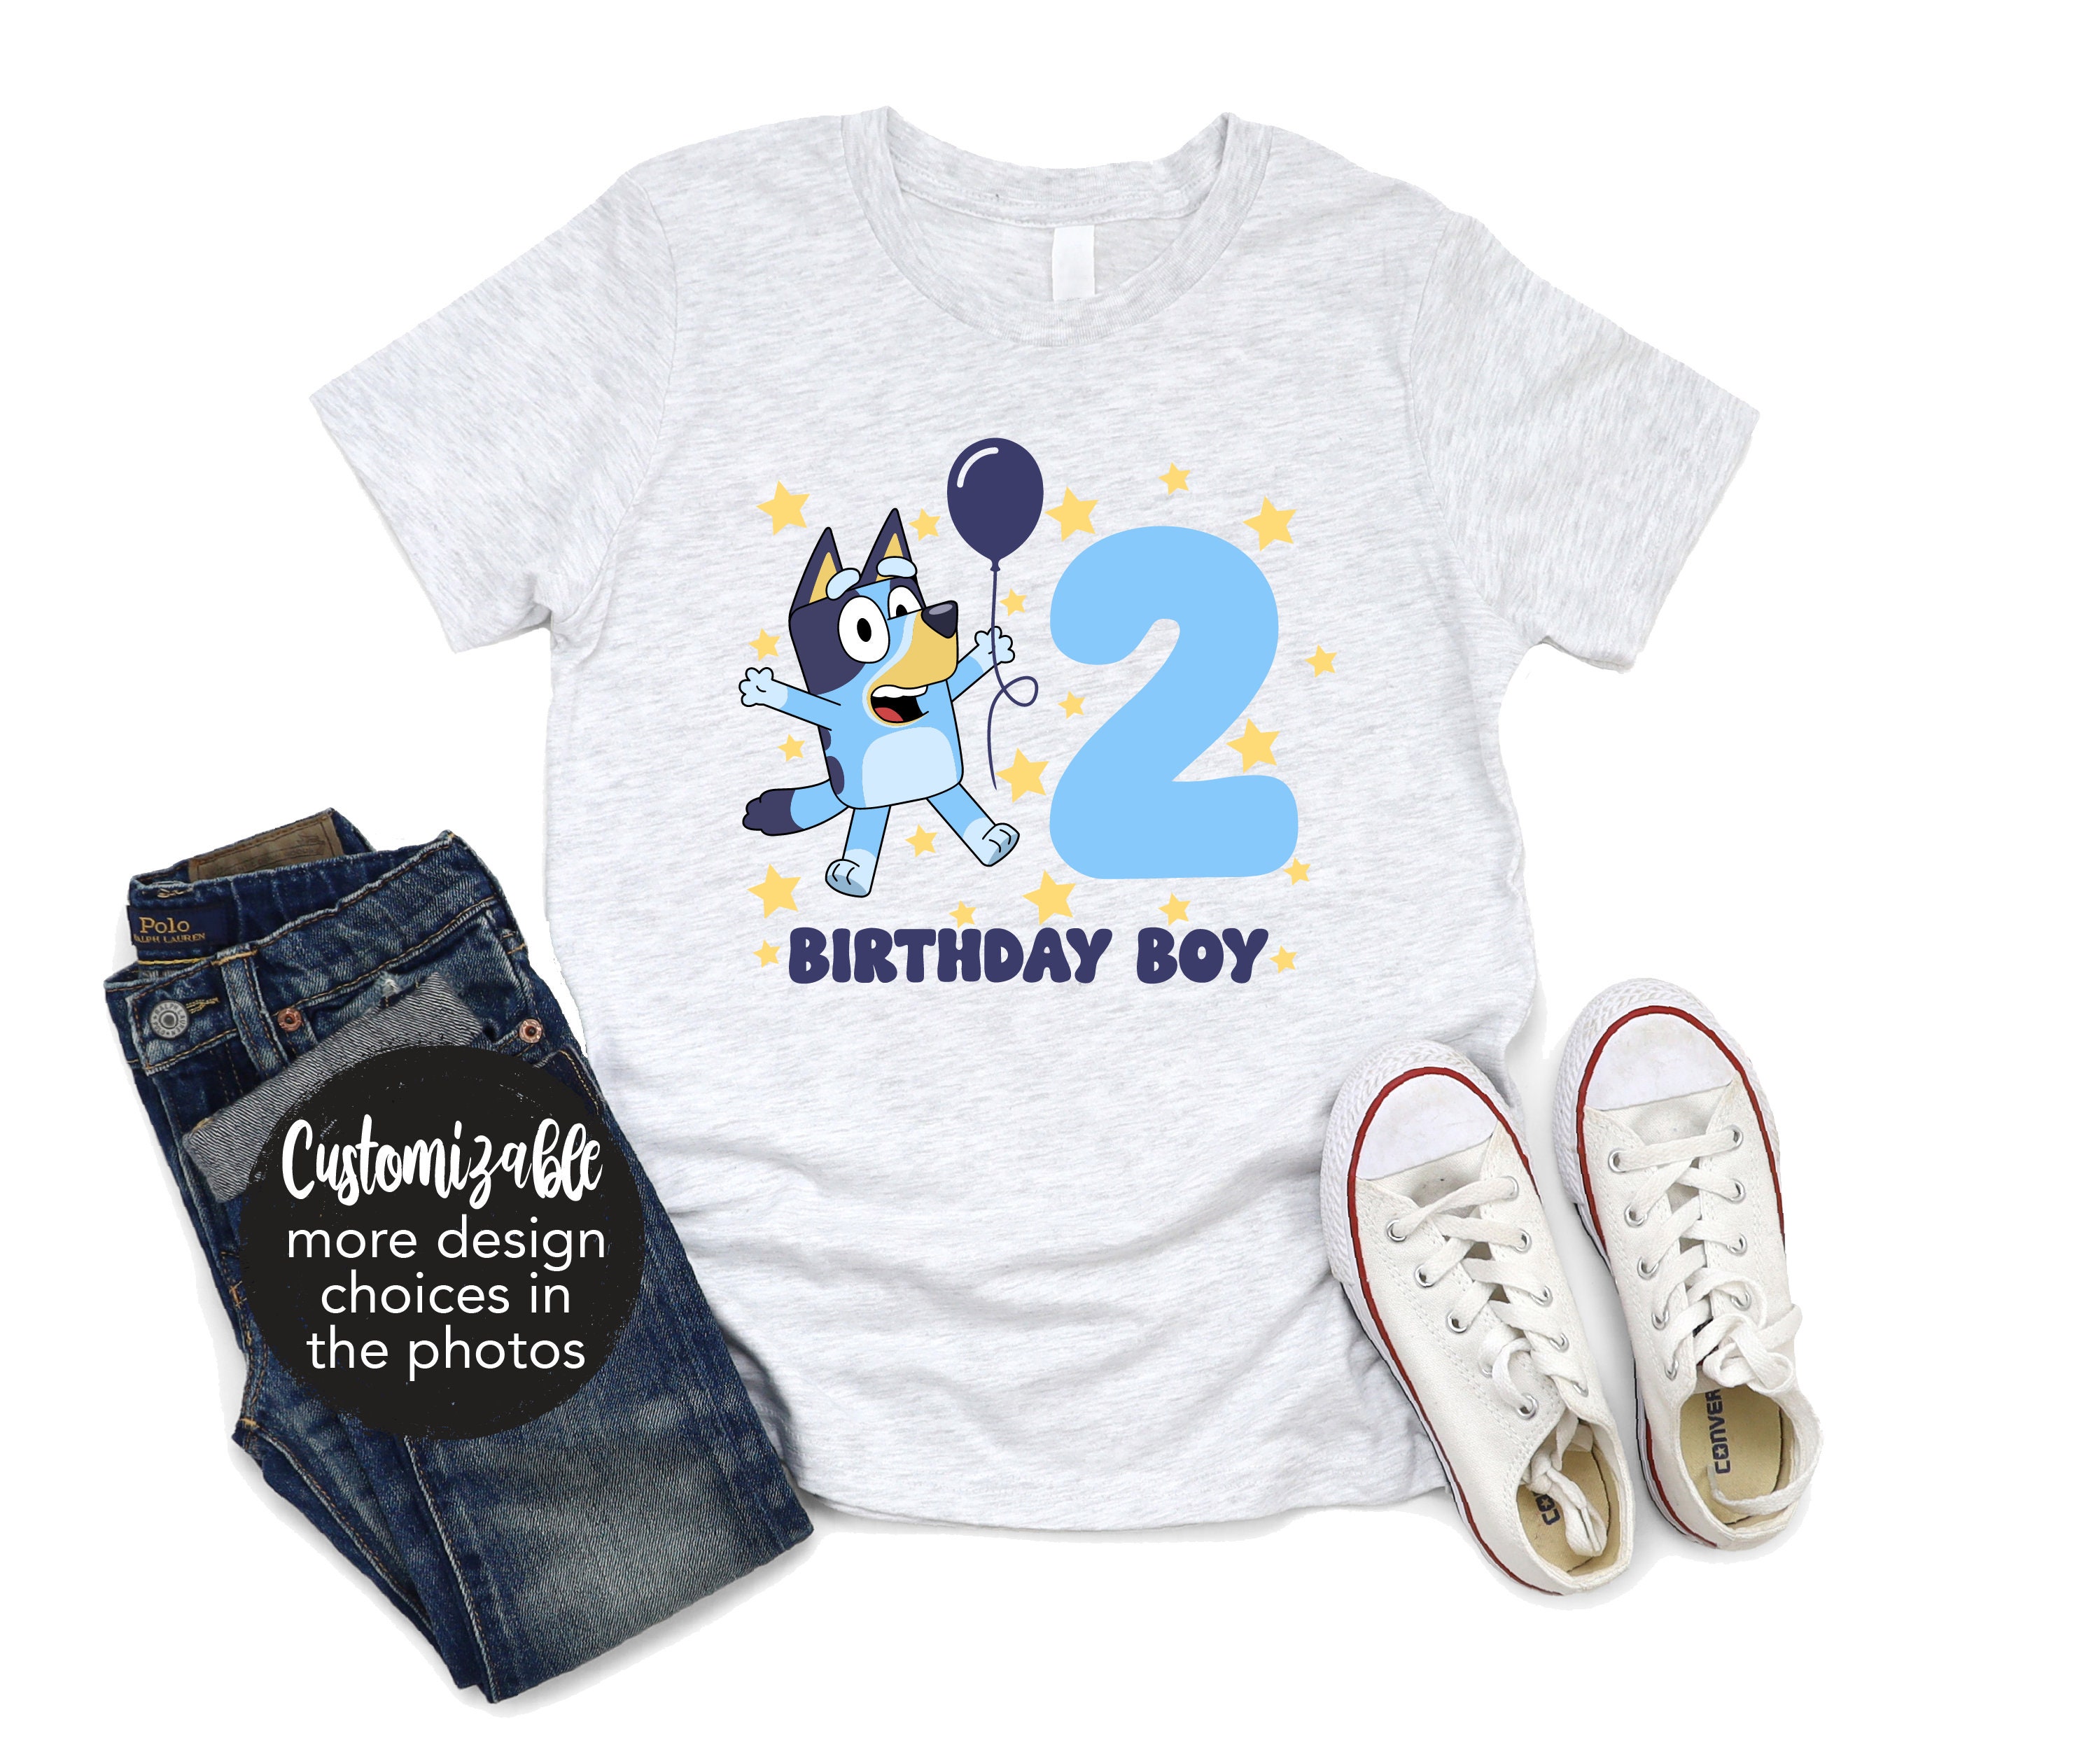 ReignBowsNtoes Bluey Outfit- Bluey Birthday Outfit- Bluey Denim Set 4T